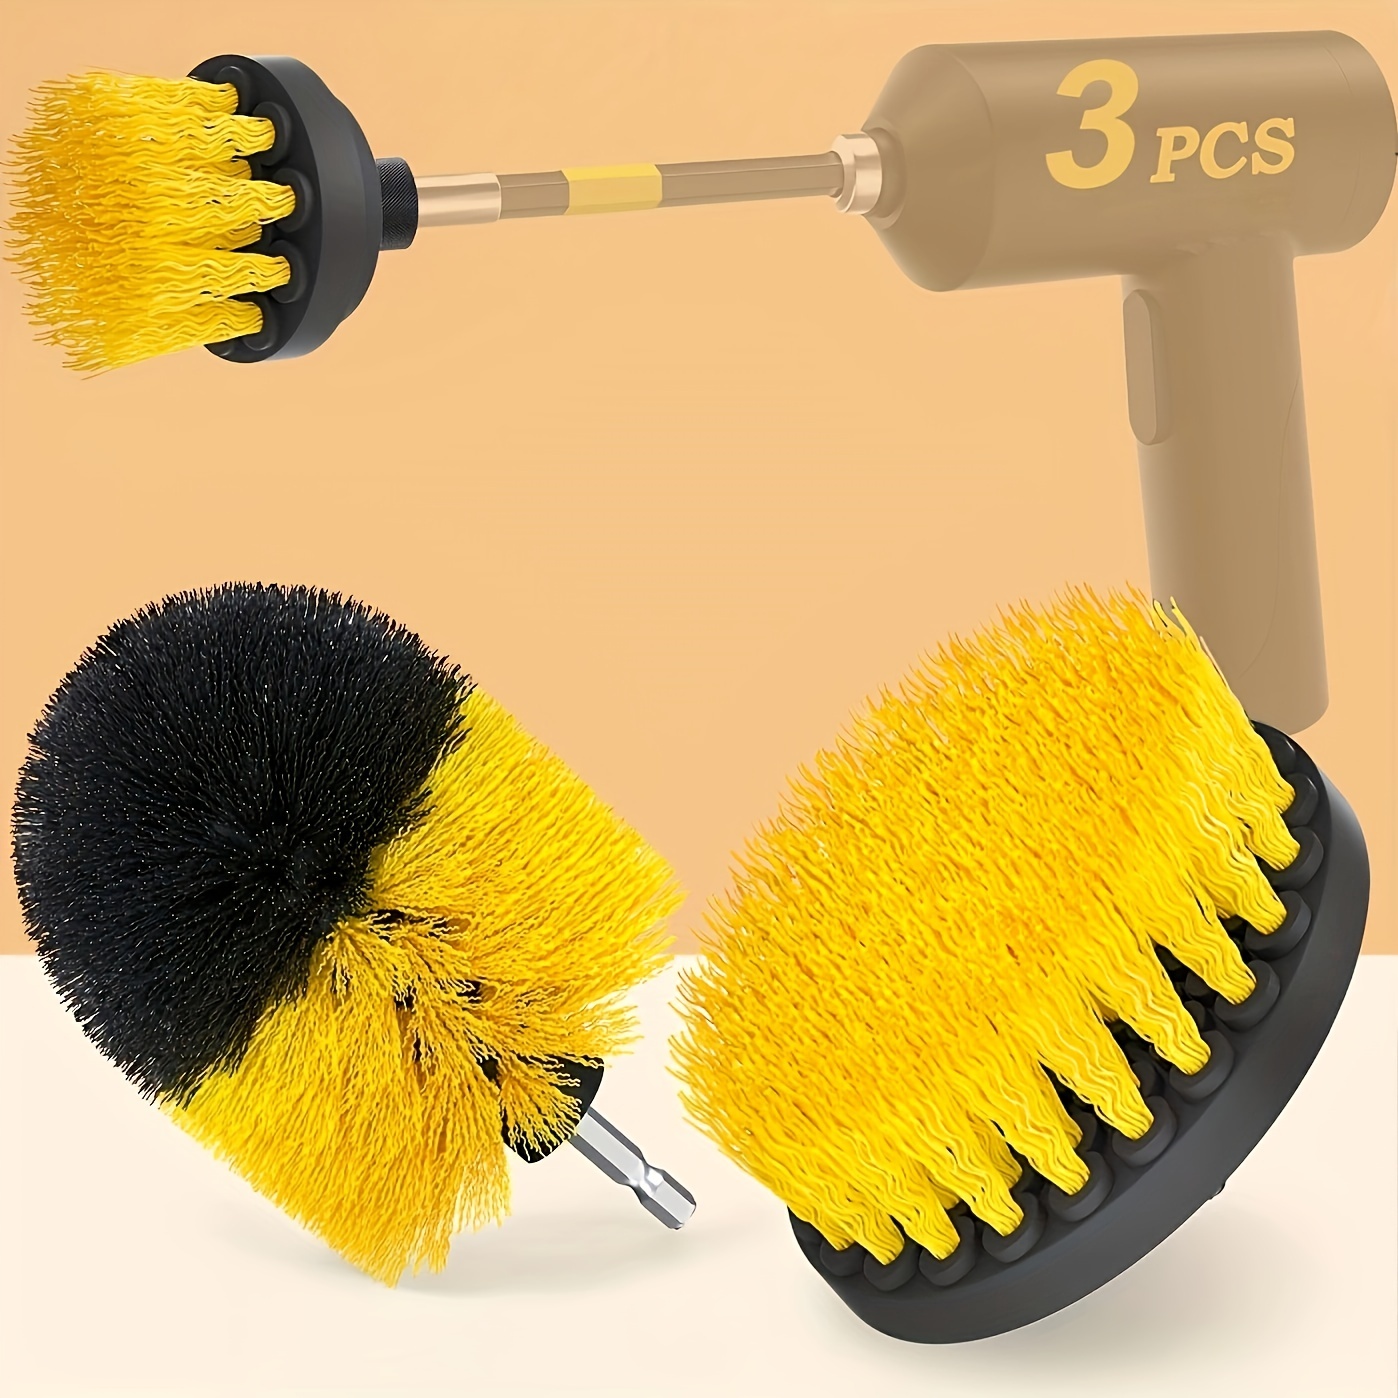 2pcs/7pcs MINI Power Scrubber Cleaning Kit Drill Brush Attachment Set With  Extender Rod, Perfect For Tile Crevice, Floor Line,Car Detailing Brush, All